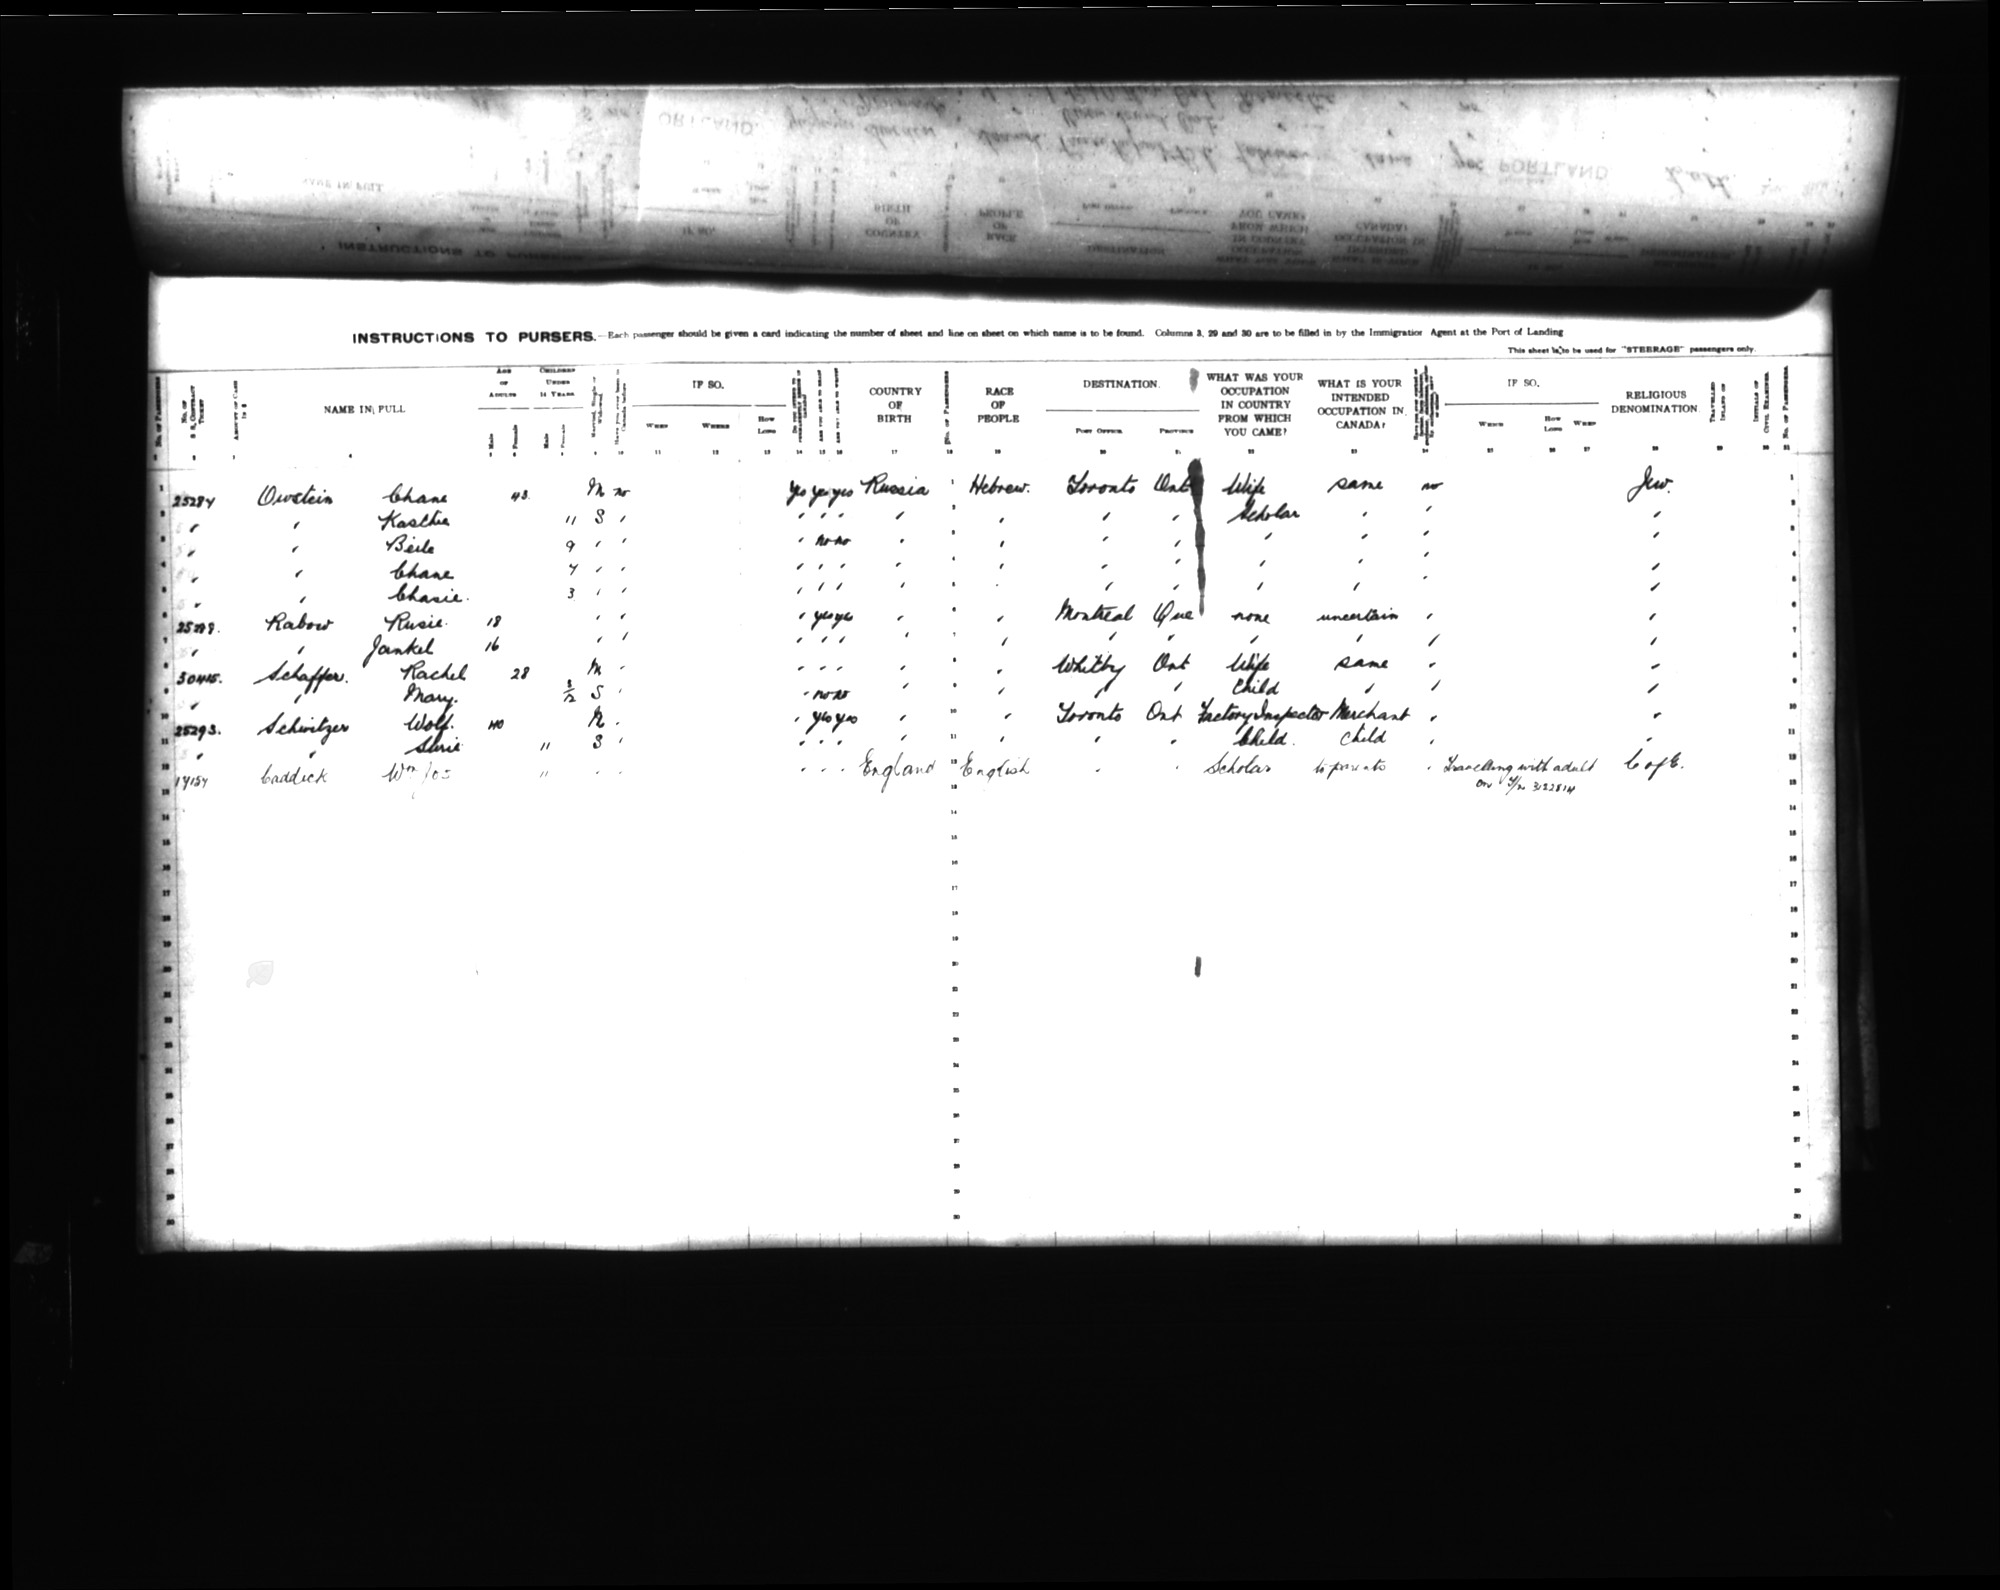 Digitized page of Passenger Lists for Image No.: CANIMM1913PLIST_0000406960-00588